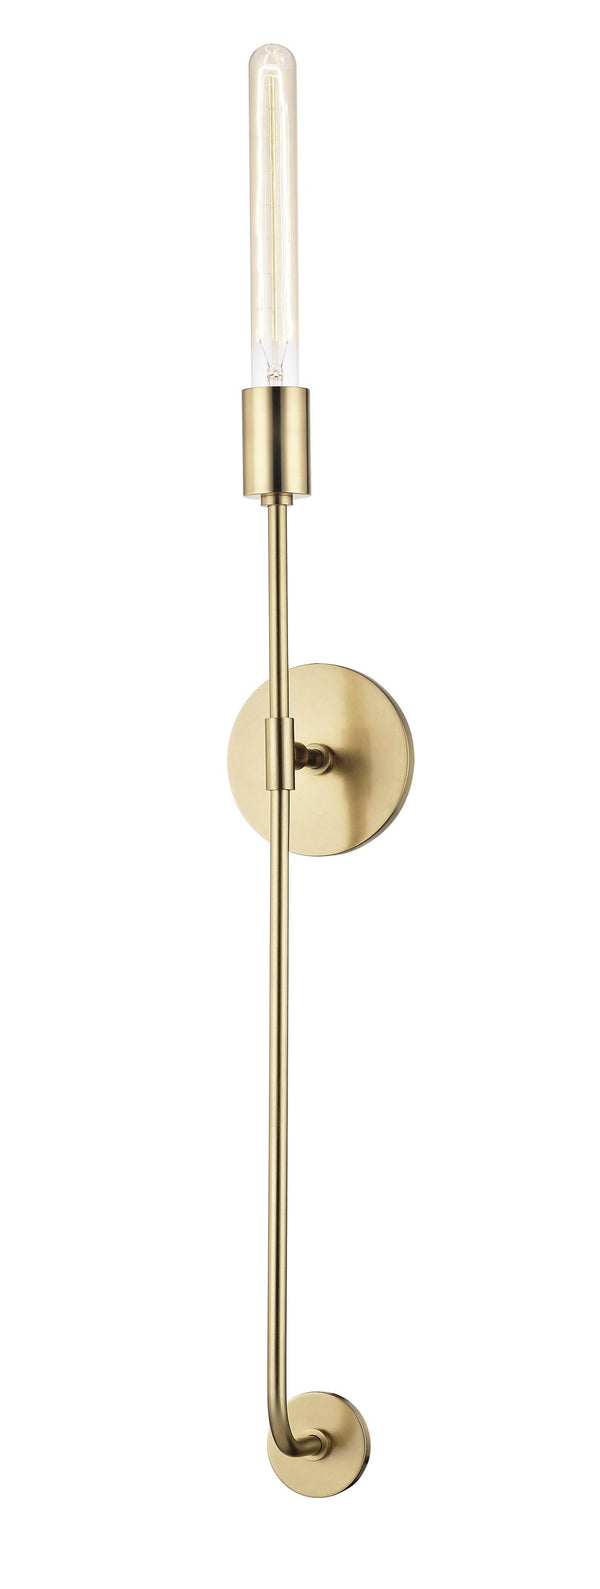 Lighting - Wall Sconce Dylan 1 Light Wall Sconce // Aged Brass 